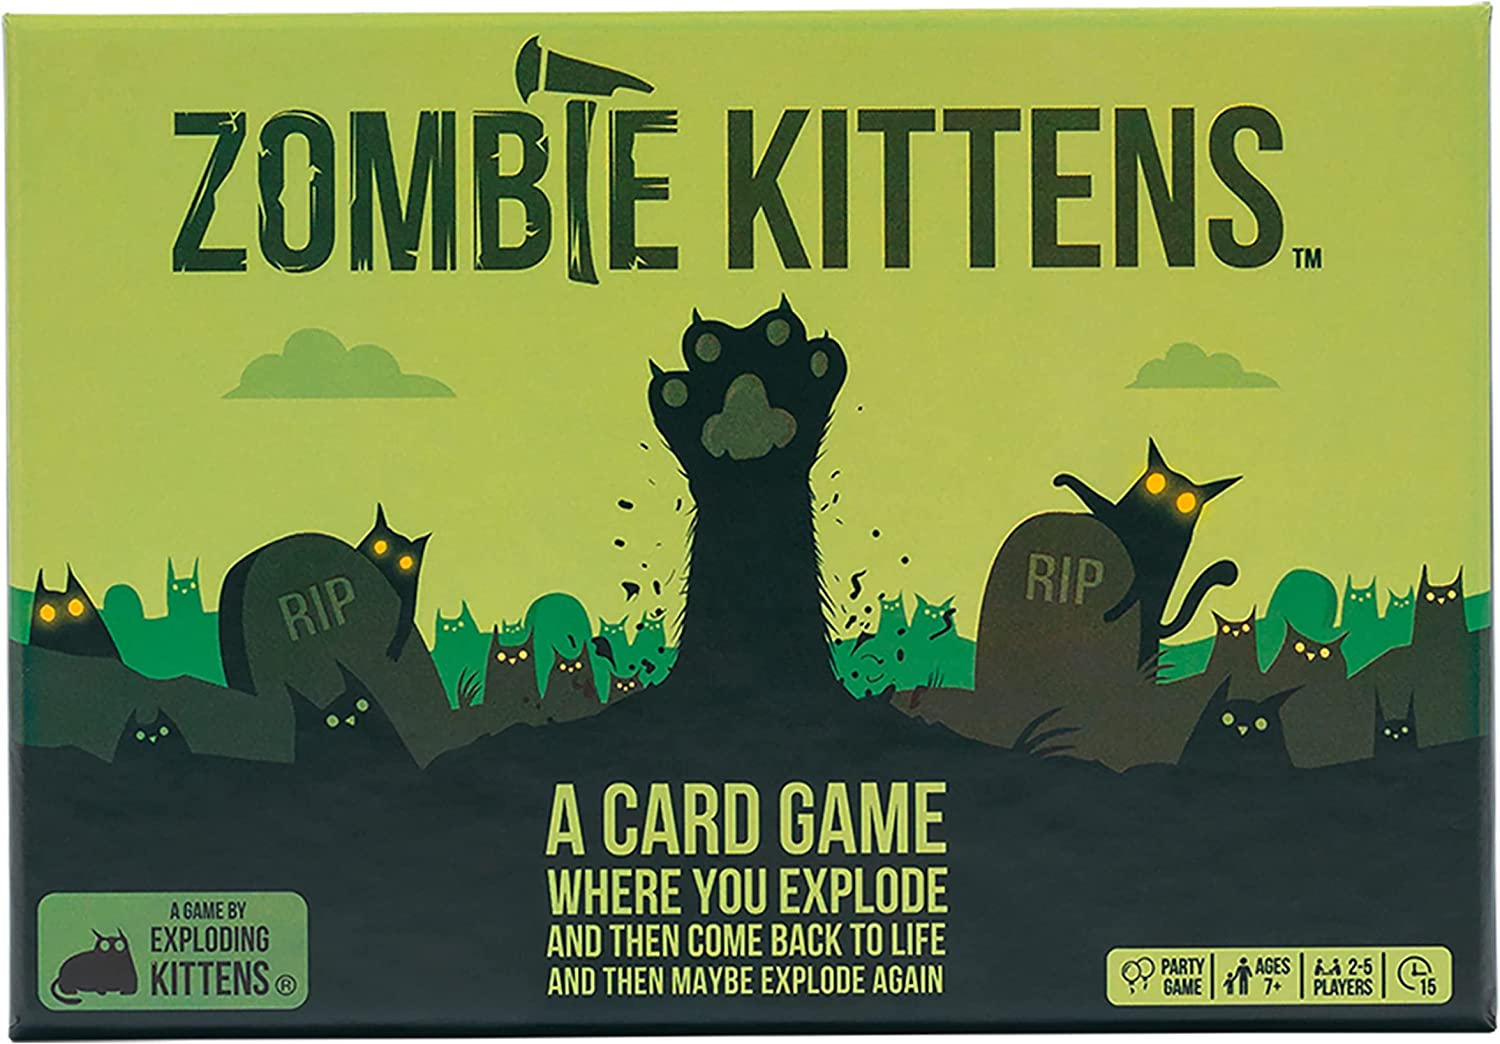 How to play: Exploding Kittens is a highly-strategic, kitty powered version of Russian roulette. Players draw cards until somebody draws an exploding kitten. At which point they explode and they